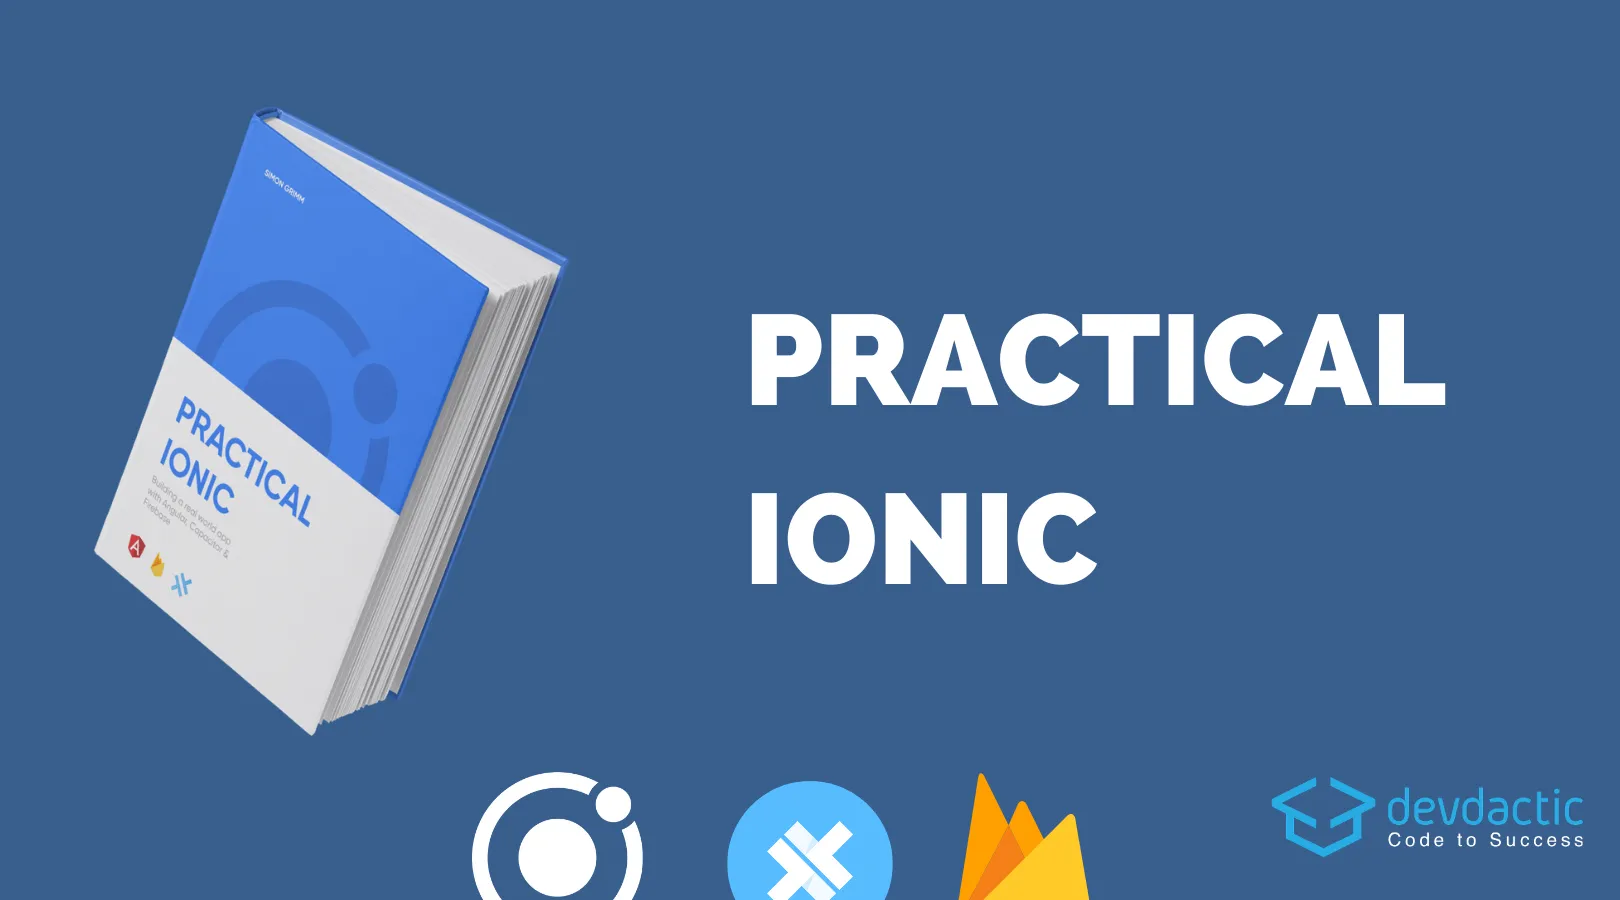 Practical Ionic - Build Real World Applications